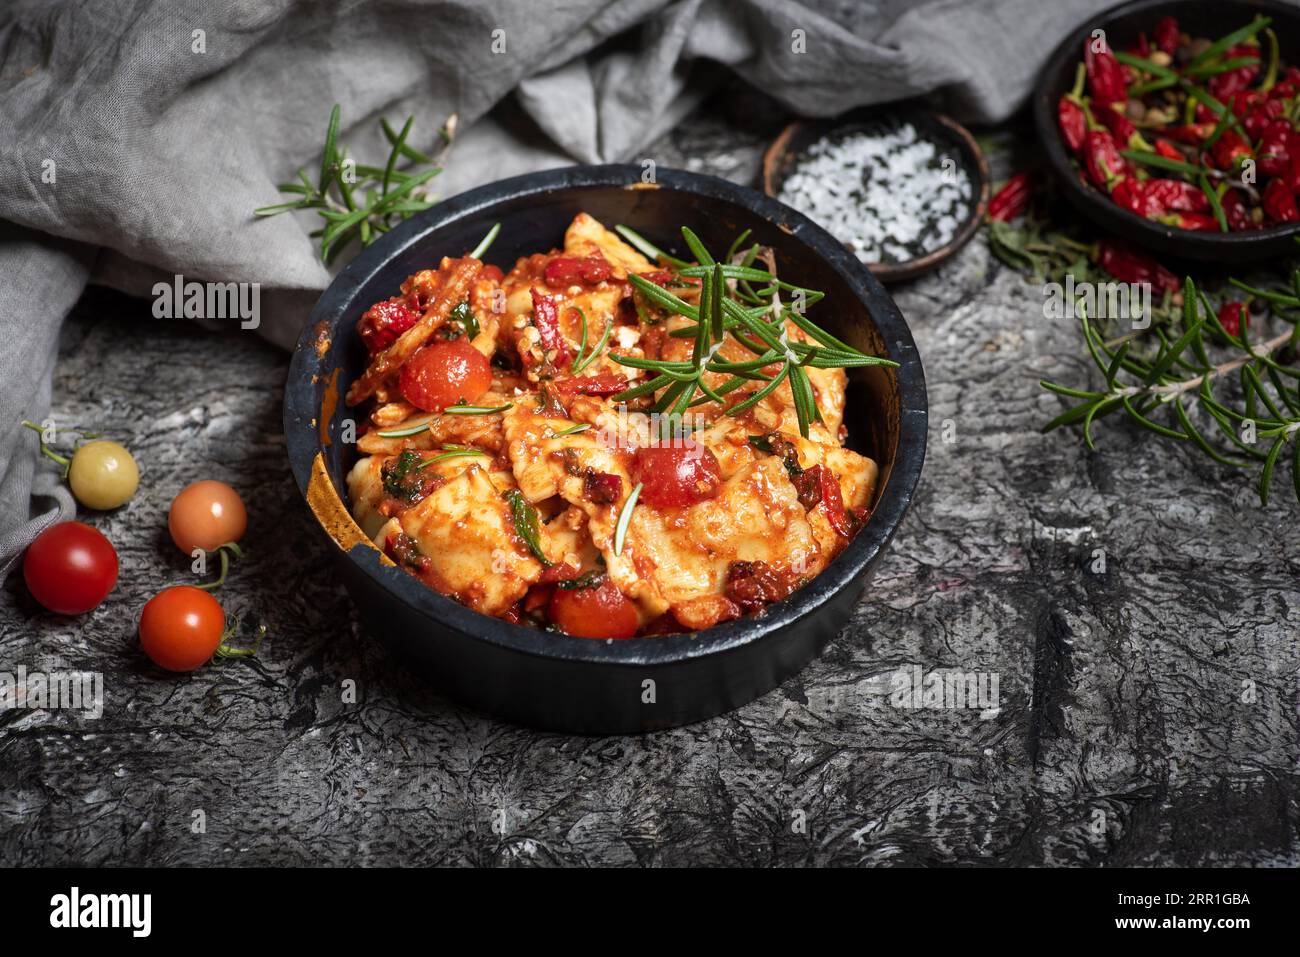 Ravioli, with cherry tomatoes, garnished with rosemary, in a black bowl on a gray wooden background. Top view Stock Photo